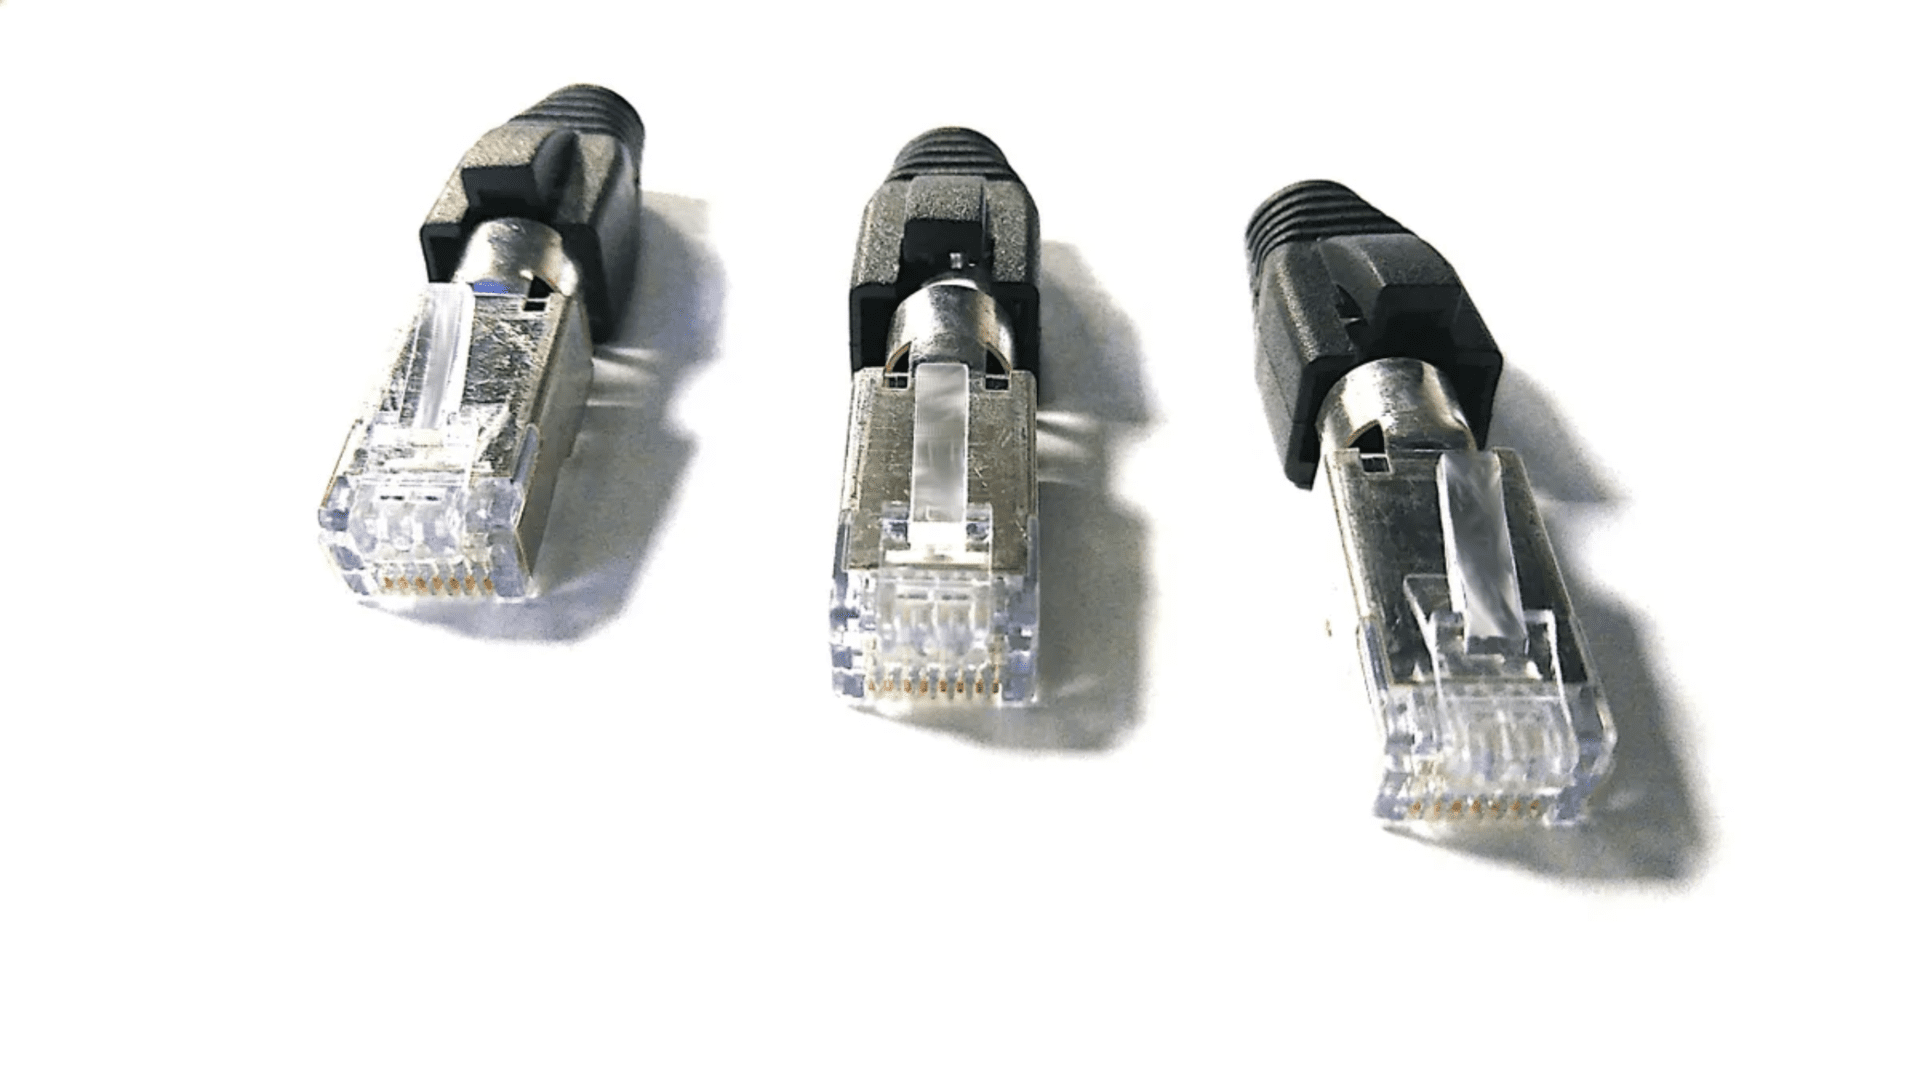 Three Sci-Flex© Ethernet cables with Category 6A/6 RJ45 plugs and transparent connectors on a white background.